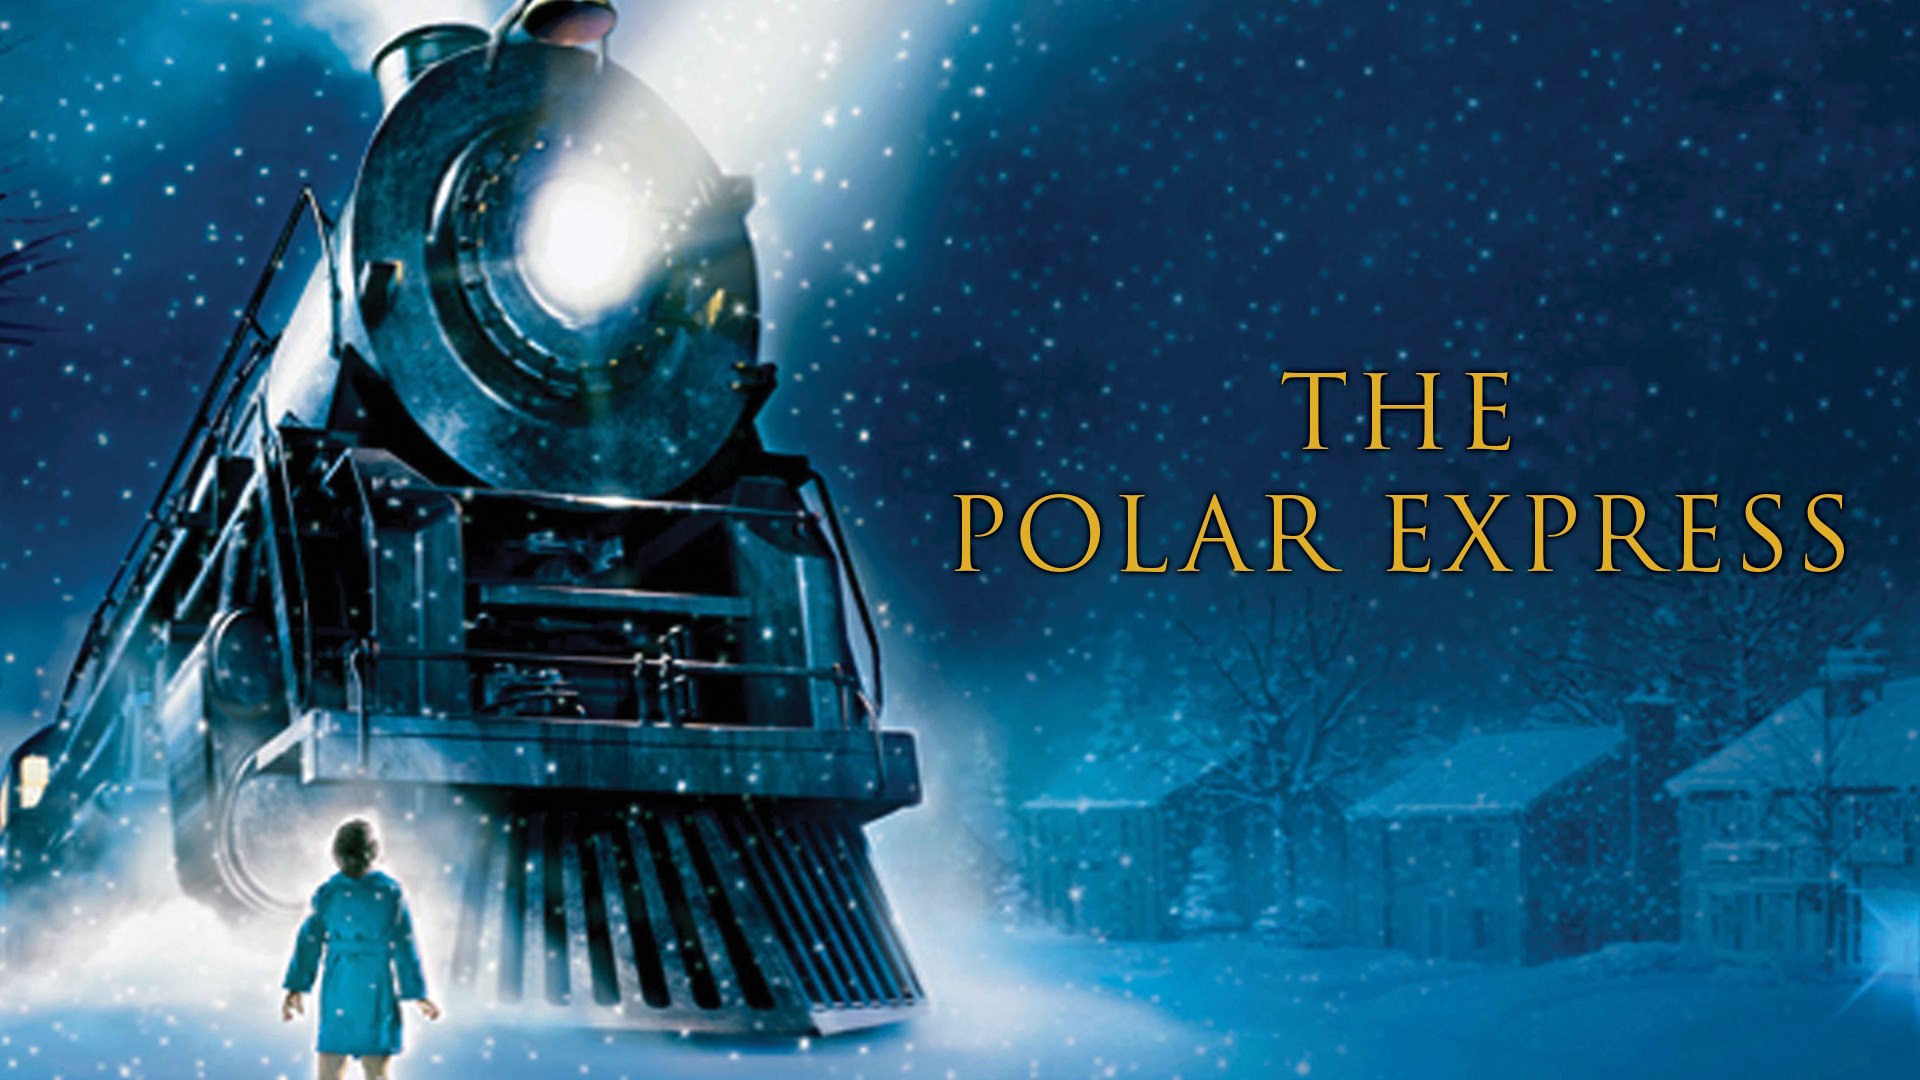 Event Promo Photo For 'The Polar Express' at the Cosmospere